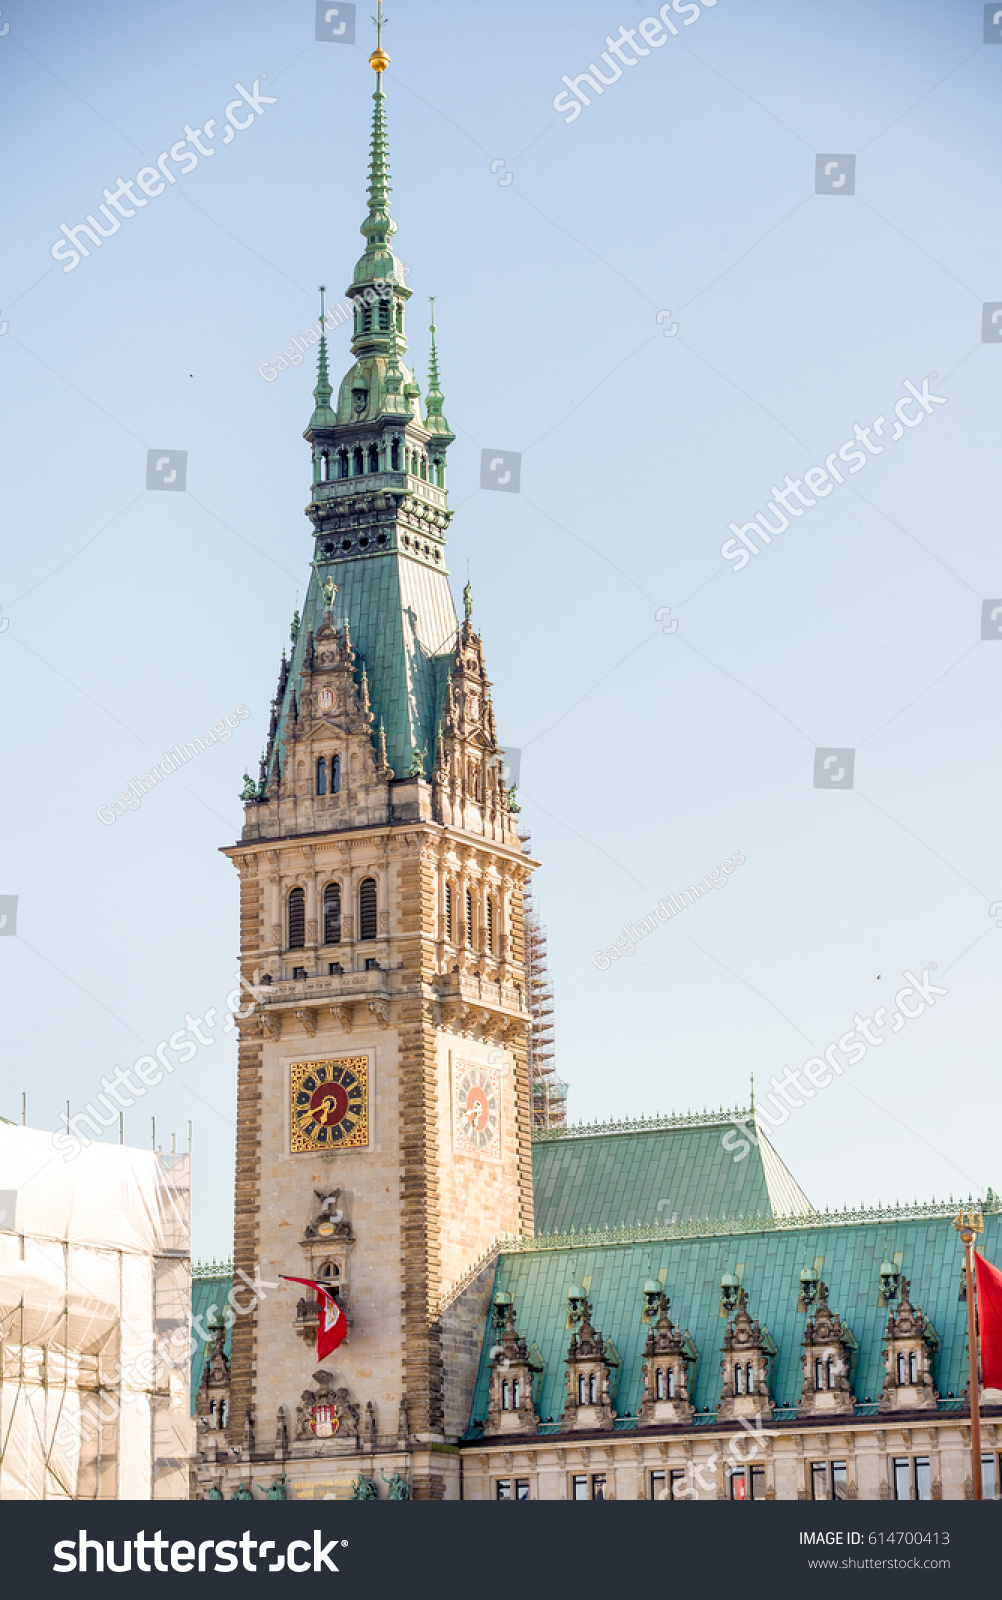 Old City Hall on Rathausmarkt in Hamburg on a beautiful day - Germany. #614700413